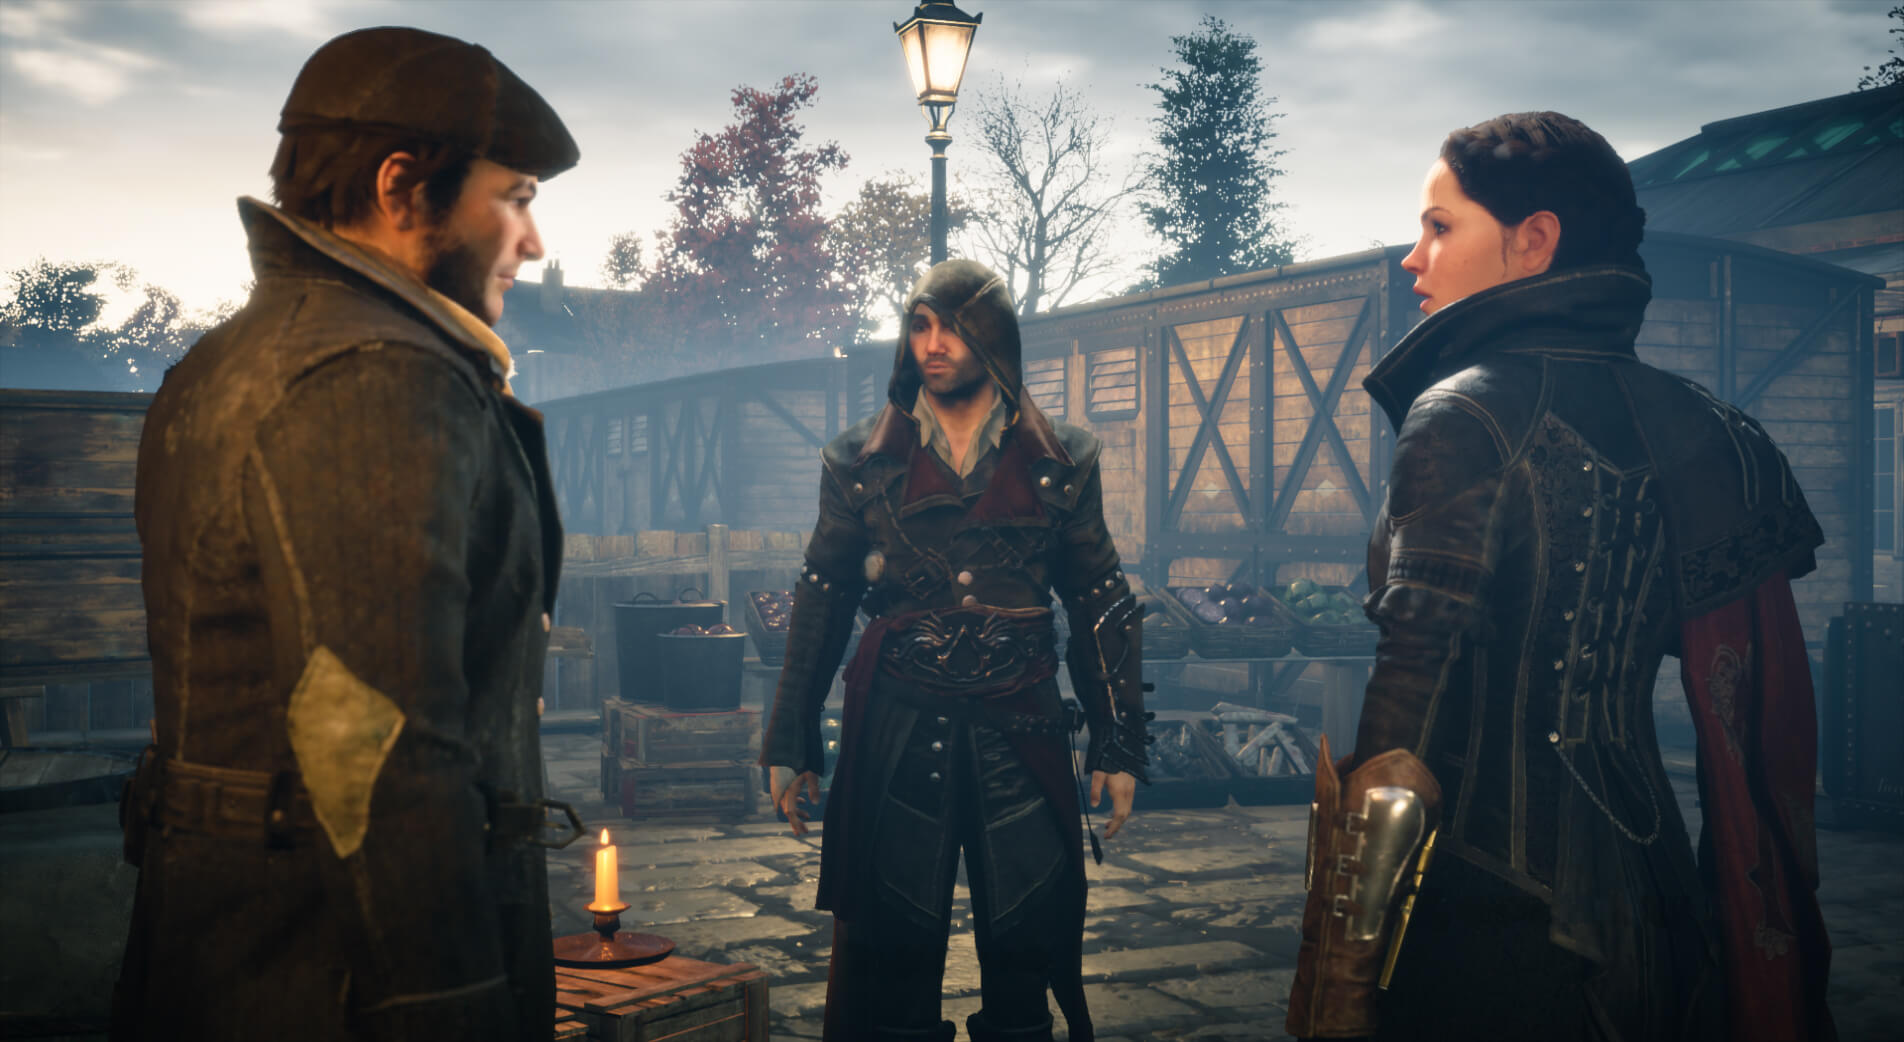 Assassin's Creed Syndicate, a game which reportedly had its female protagonist's role sidelined by former Ubisoft CCO Serge Hascoet